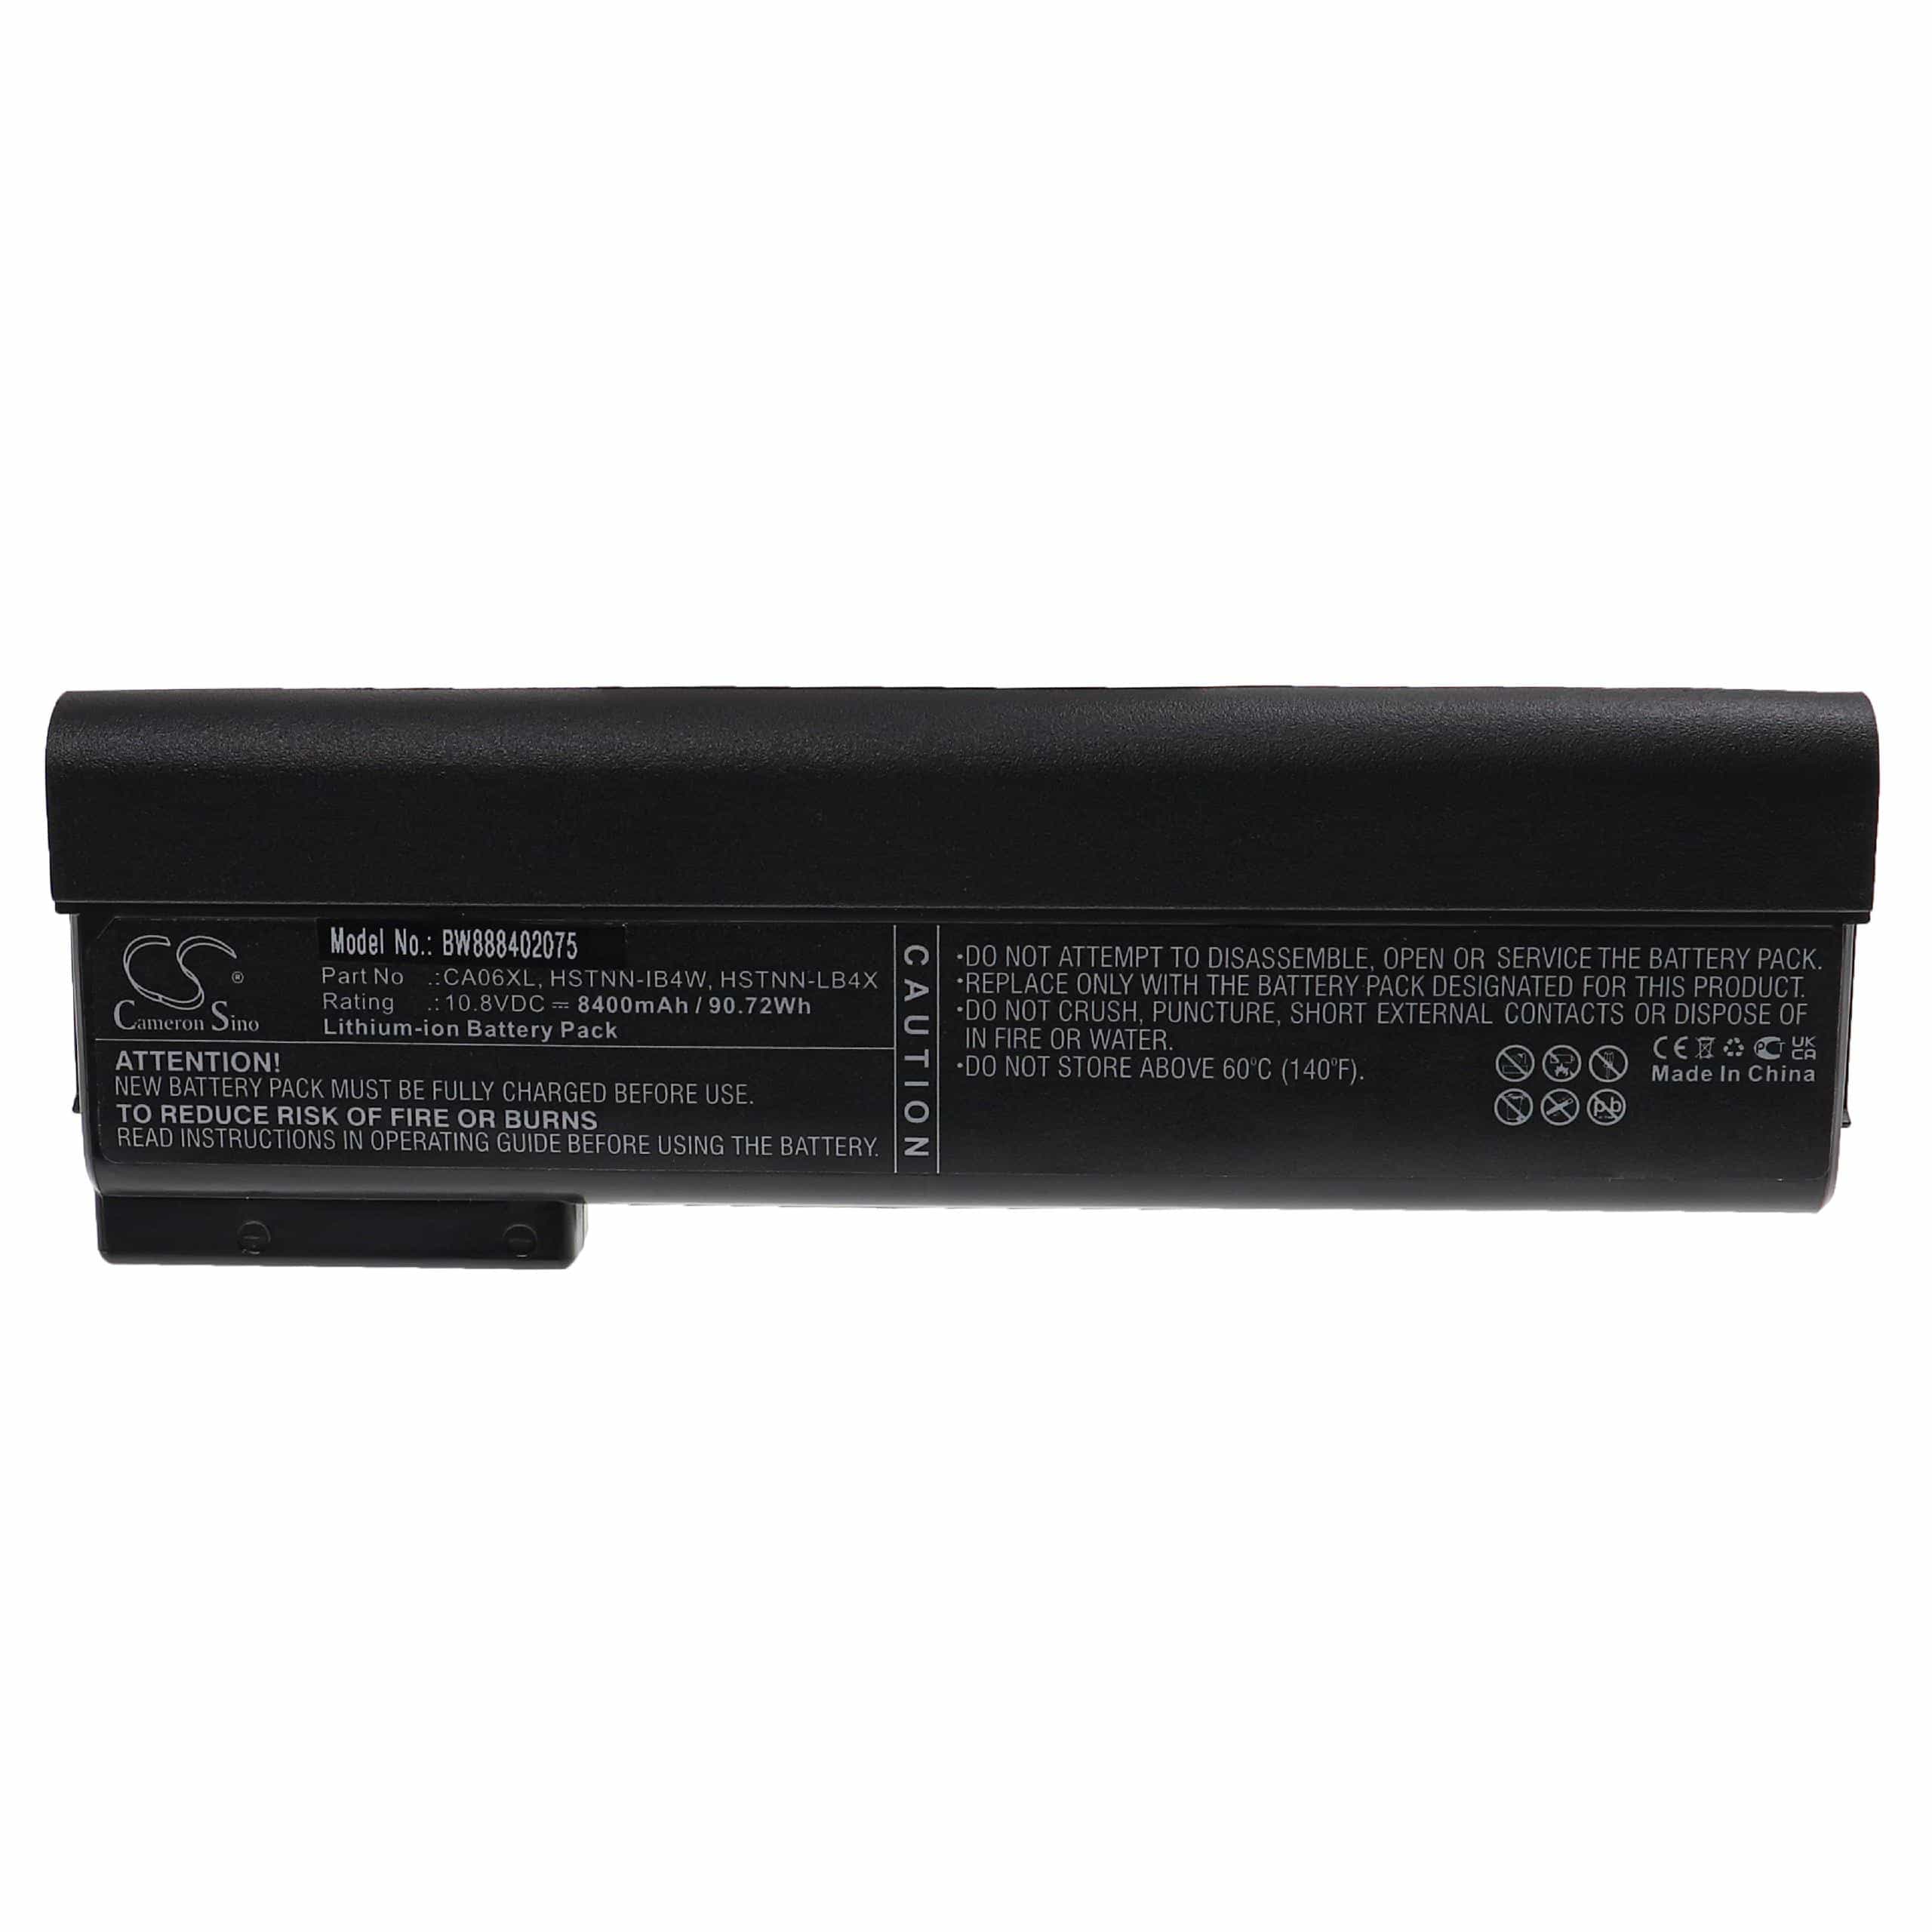 Notebook Battery Replacement for HP 718676-121, 718675-141, 718675-142, 718675-121 - 8400mAh 10.8V Li-Ion